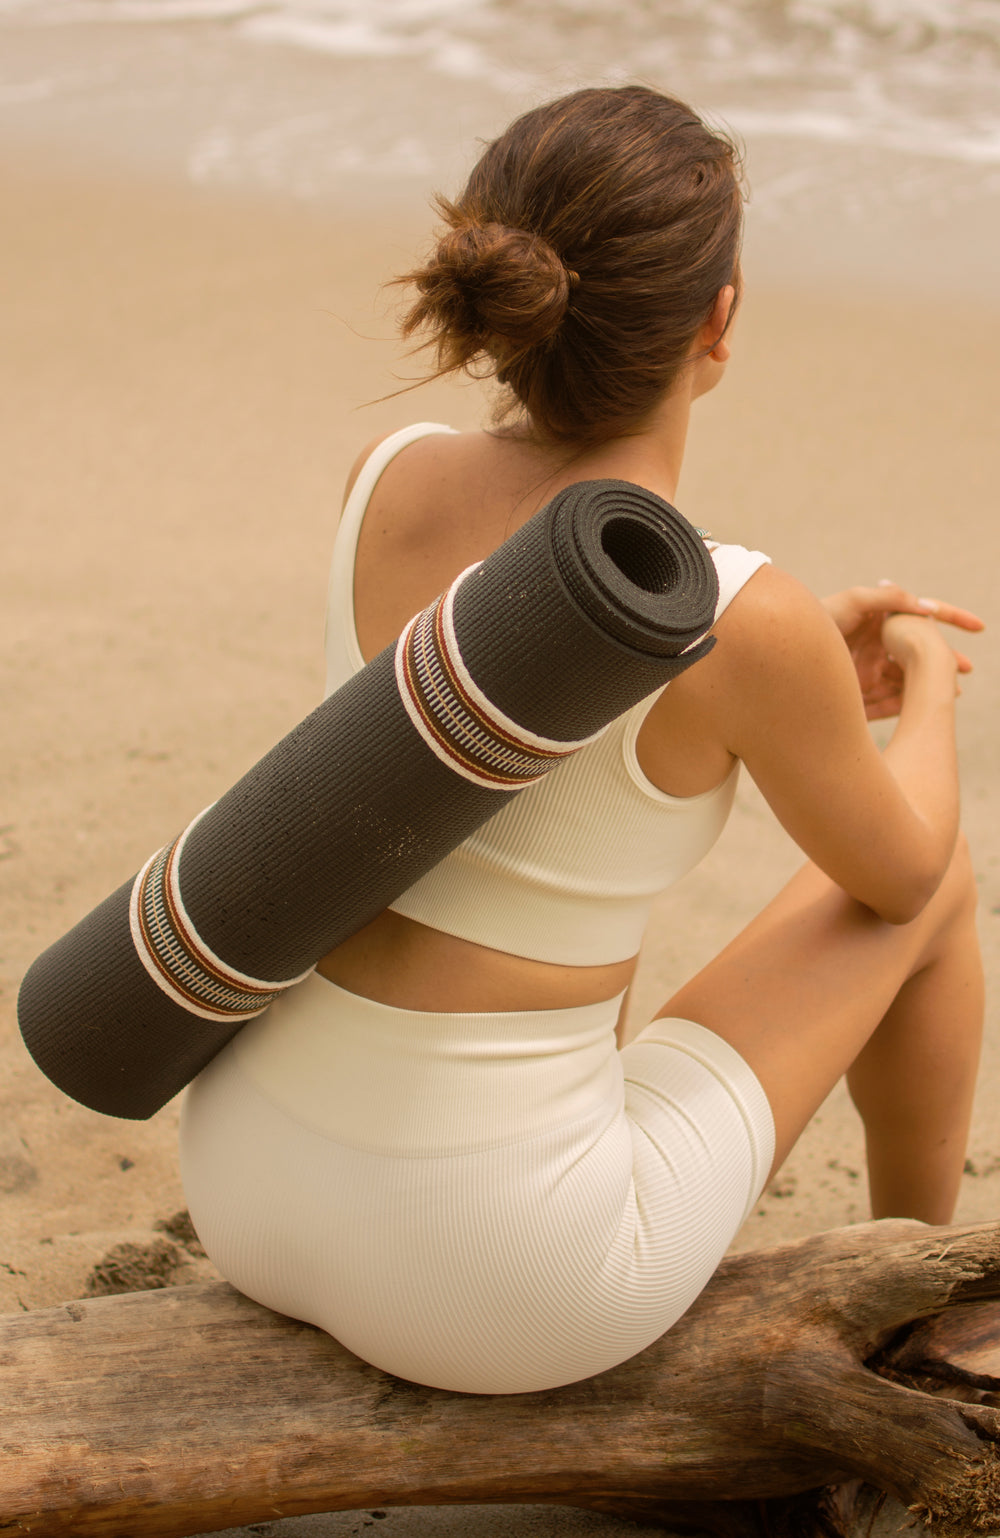 Woman sat on the beach wearing a yoga mat and strap on her back